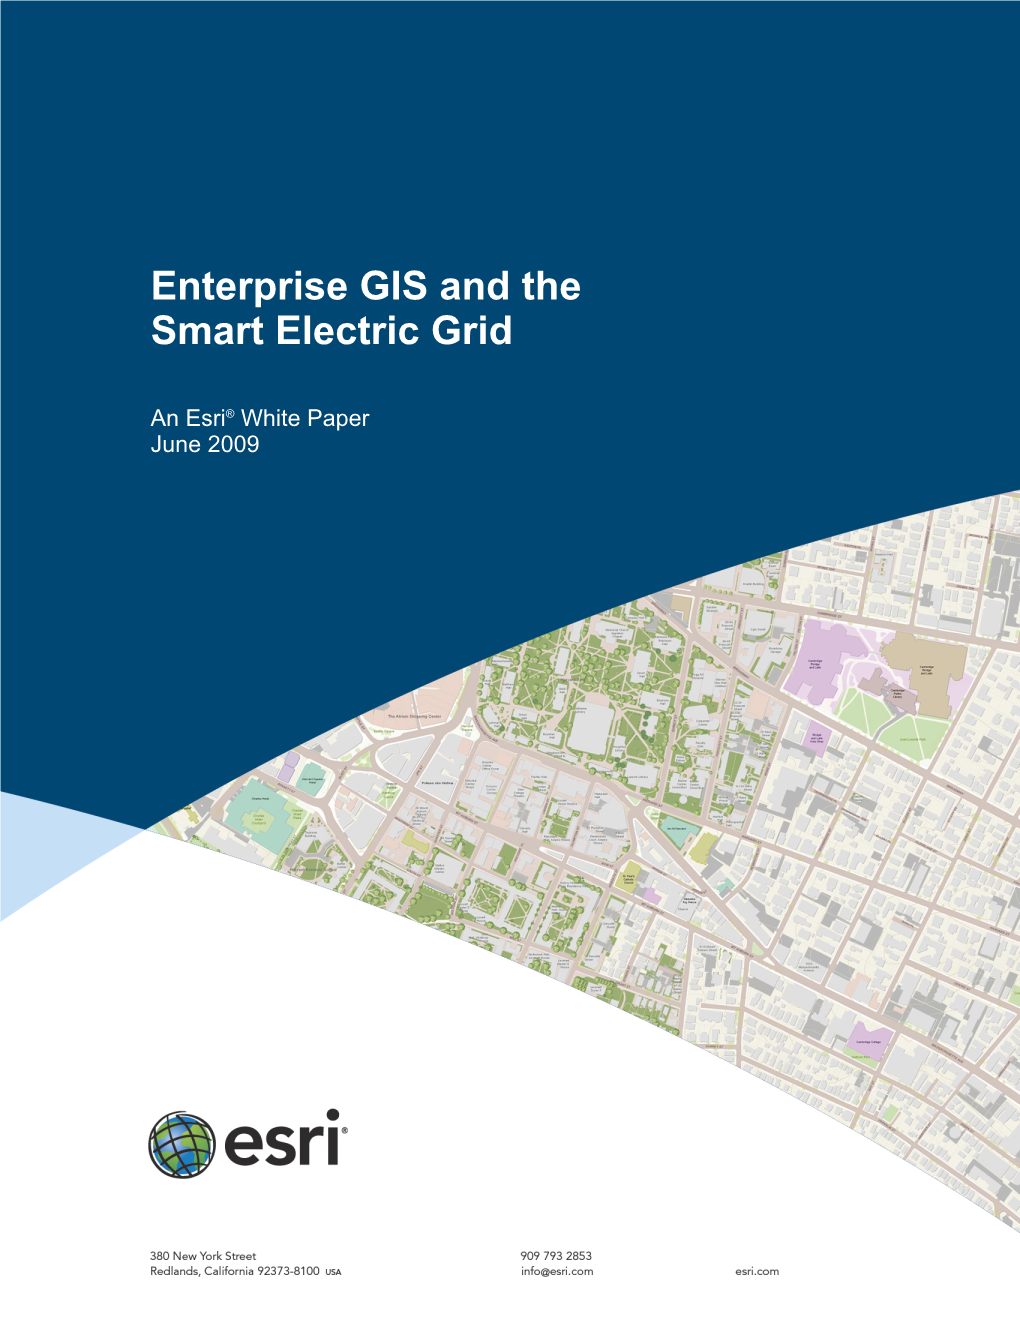 Enterprise GIS and the Smart Electric Grid